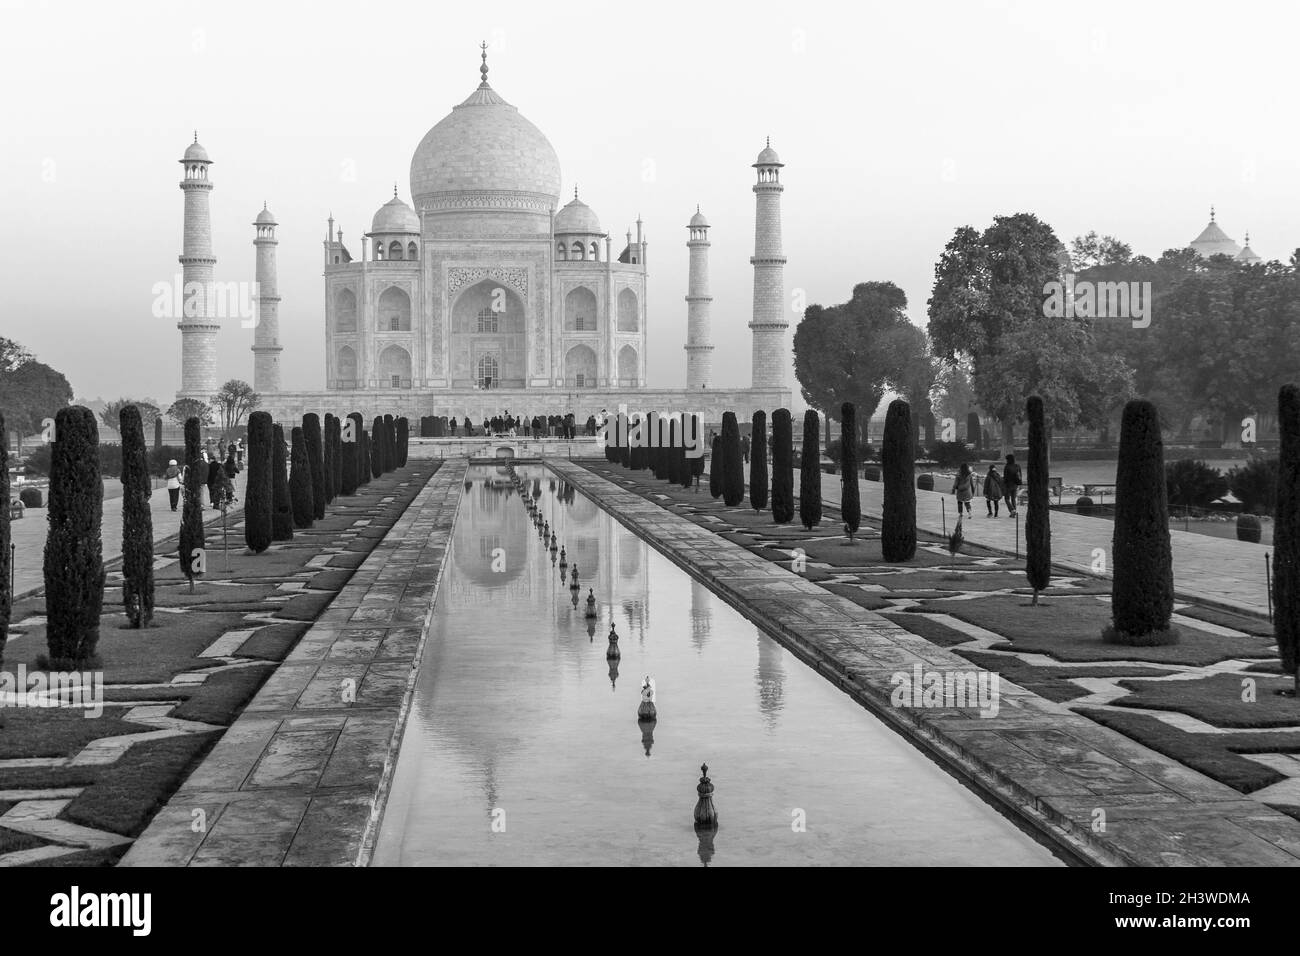 Taj Mahal and its reflection. The classic view in BnW. Stock Photo